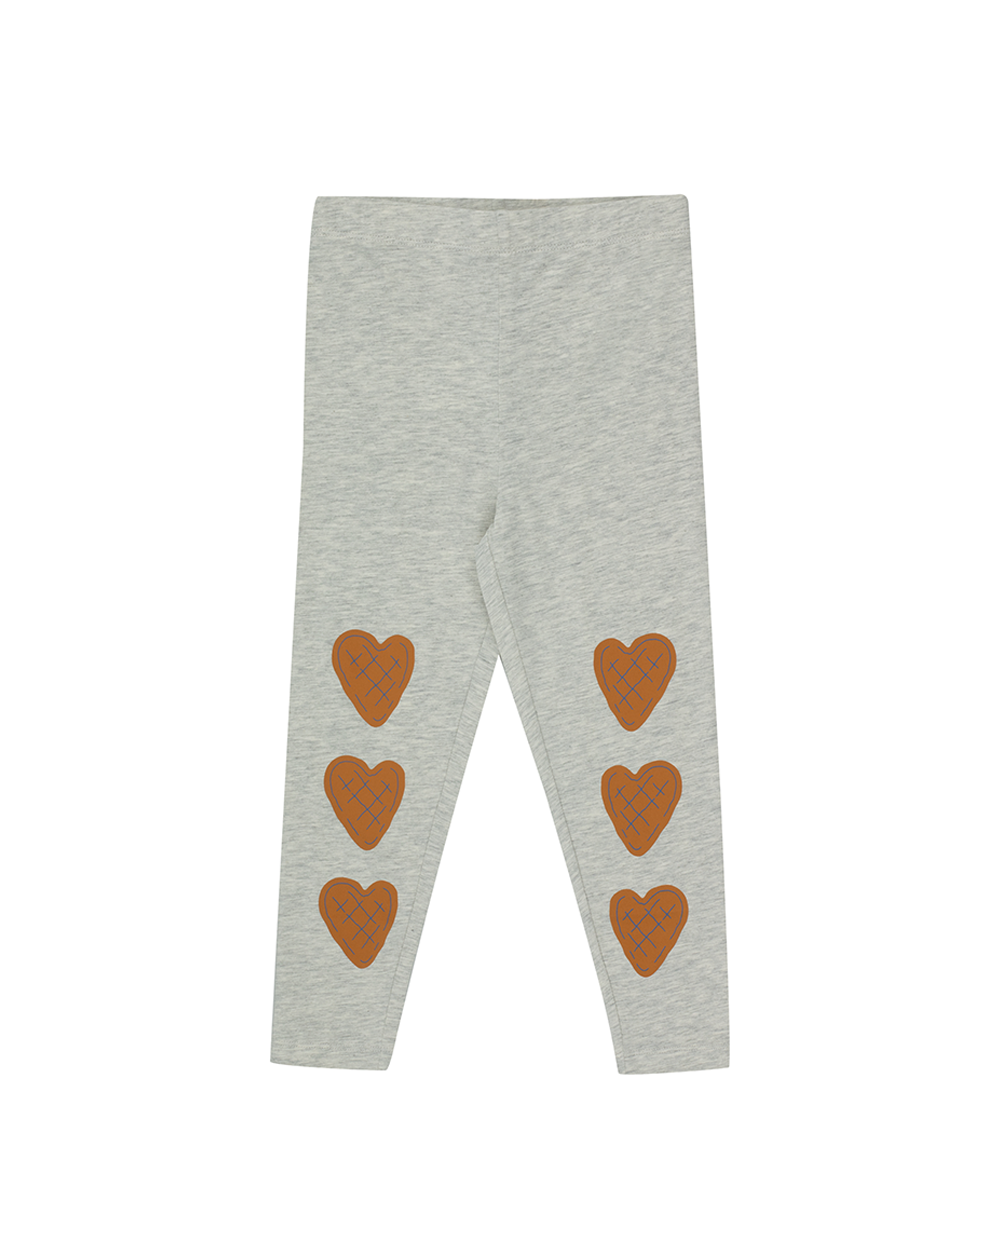 [TINY COTTONS] HEARTS PANT [4Y, 6Y]